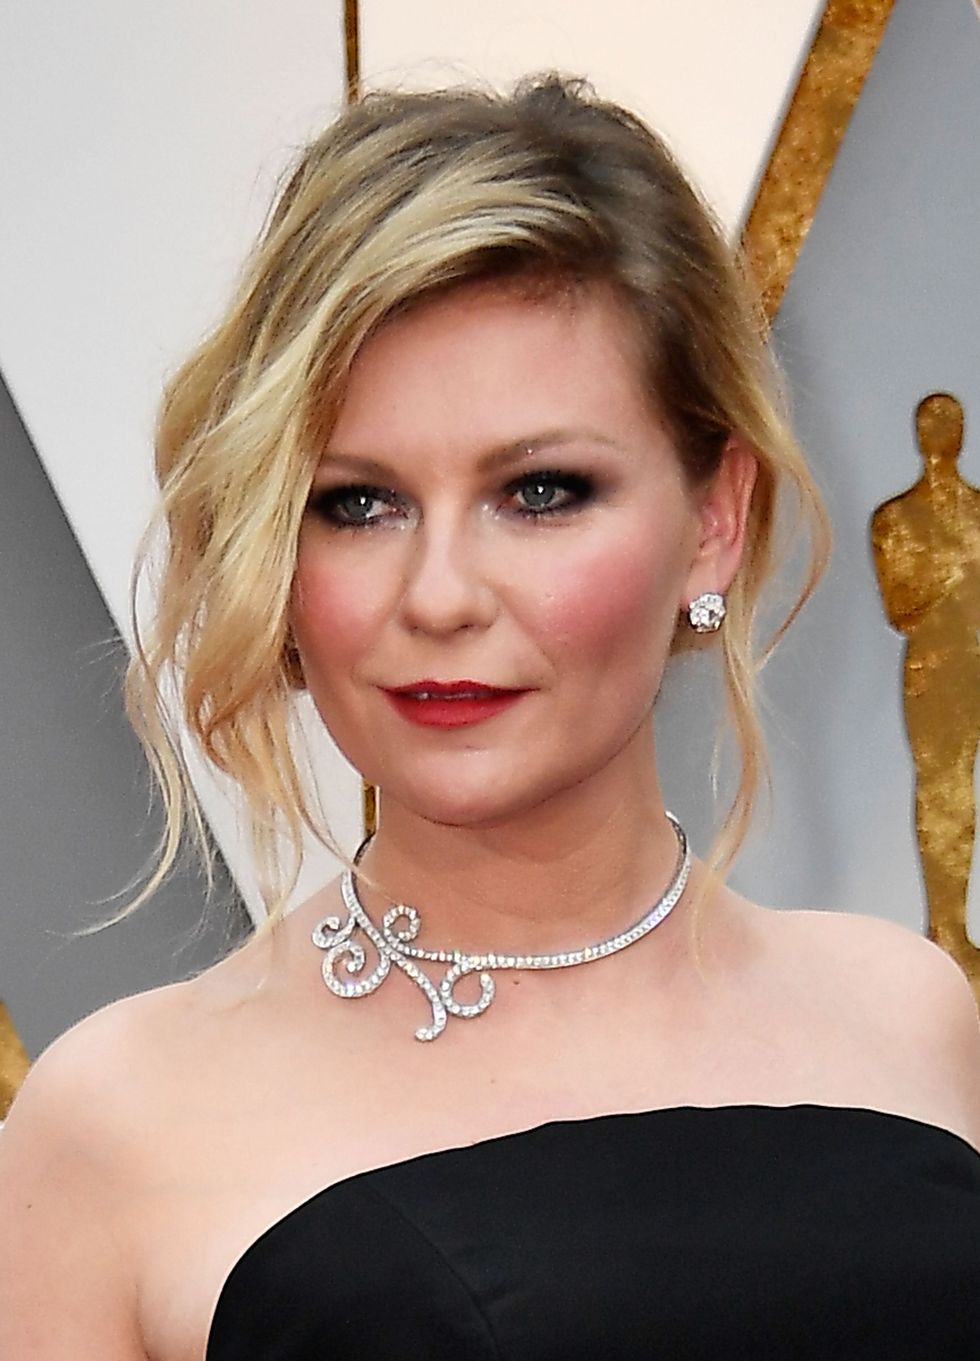 HOLLYWOOD, CA - FEBRUARY 26:  Actor Kirsten Dunst attends the 89th Annual Academy Awards at Hollywood &amp; Highland Center on February 26, 2017 in Hollywood, California.  (Photo by Frazer Harrison/Getty Images)